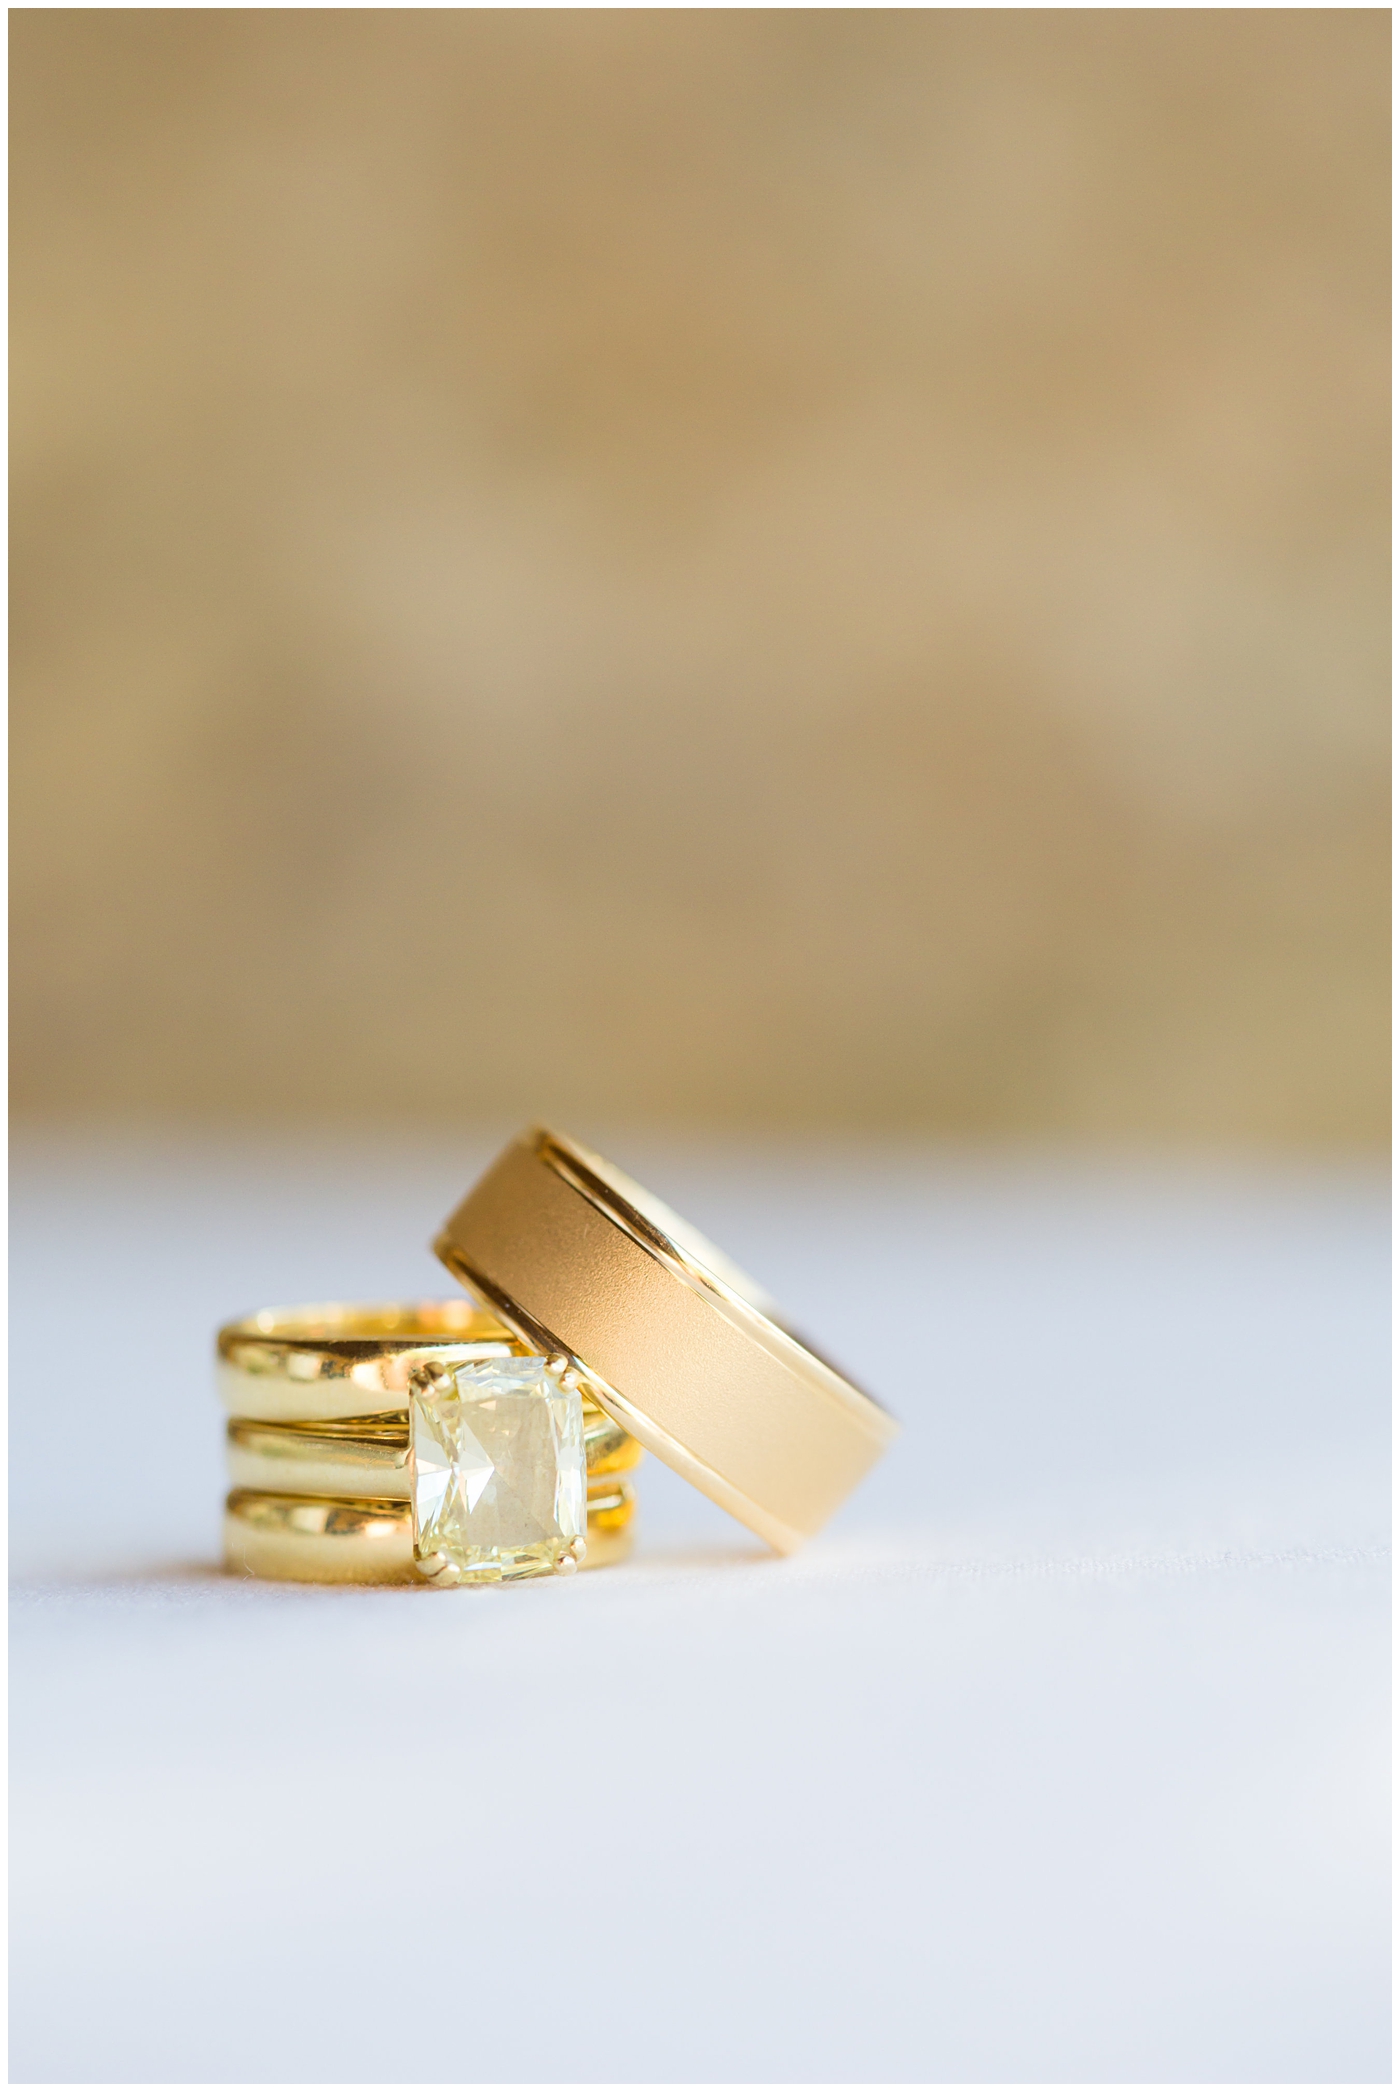 yellow canary diamond with gold band and groom gold wedding band